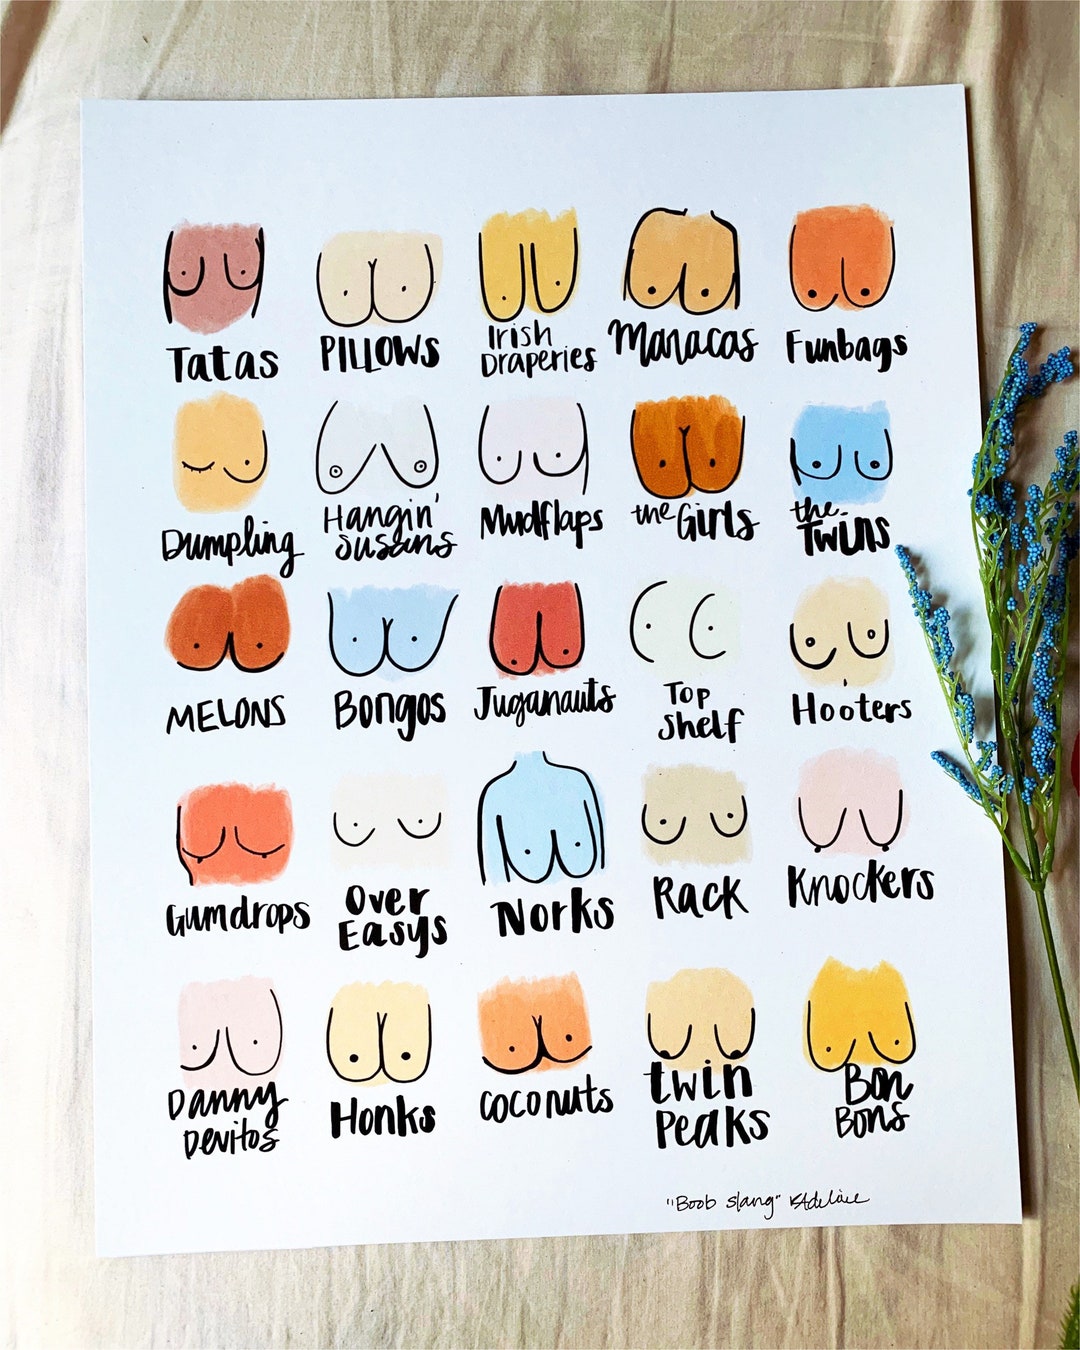 Alternative Names for Boobs - Transform - 30 Great Nicknames for